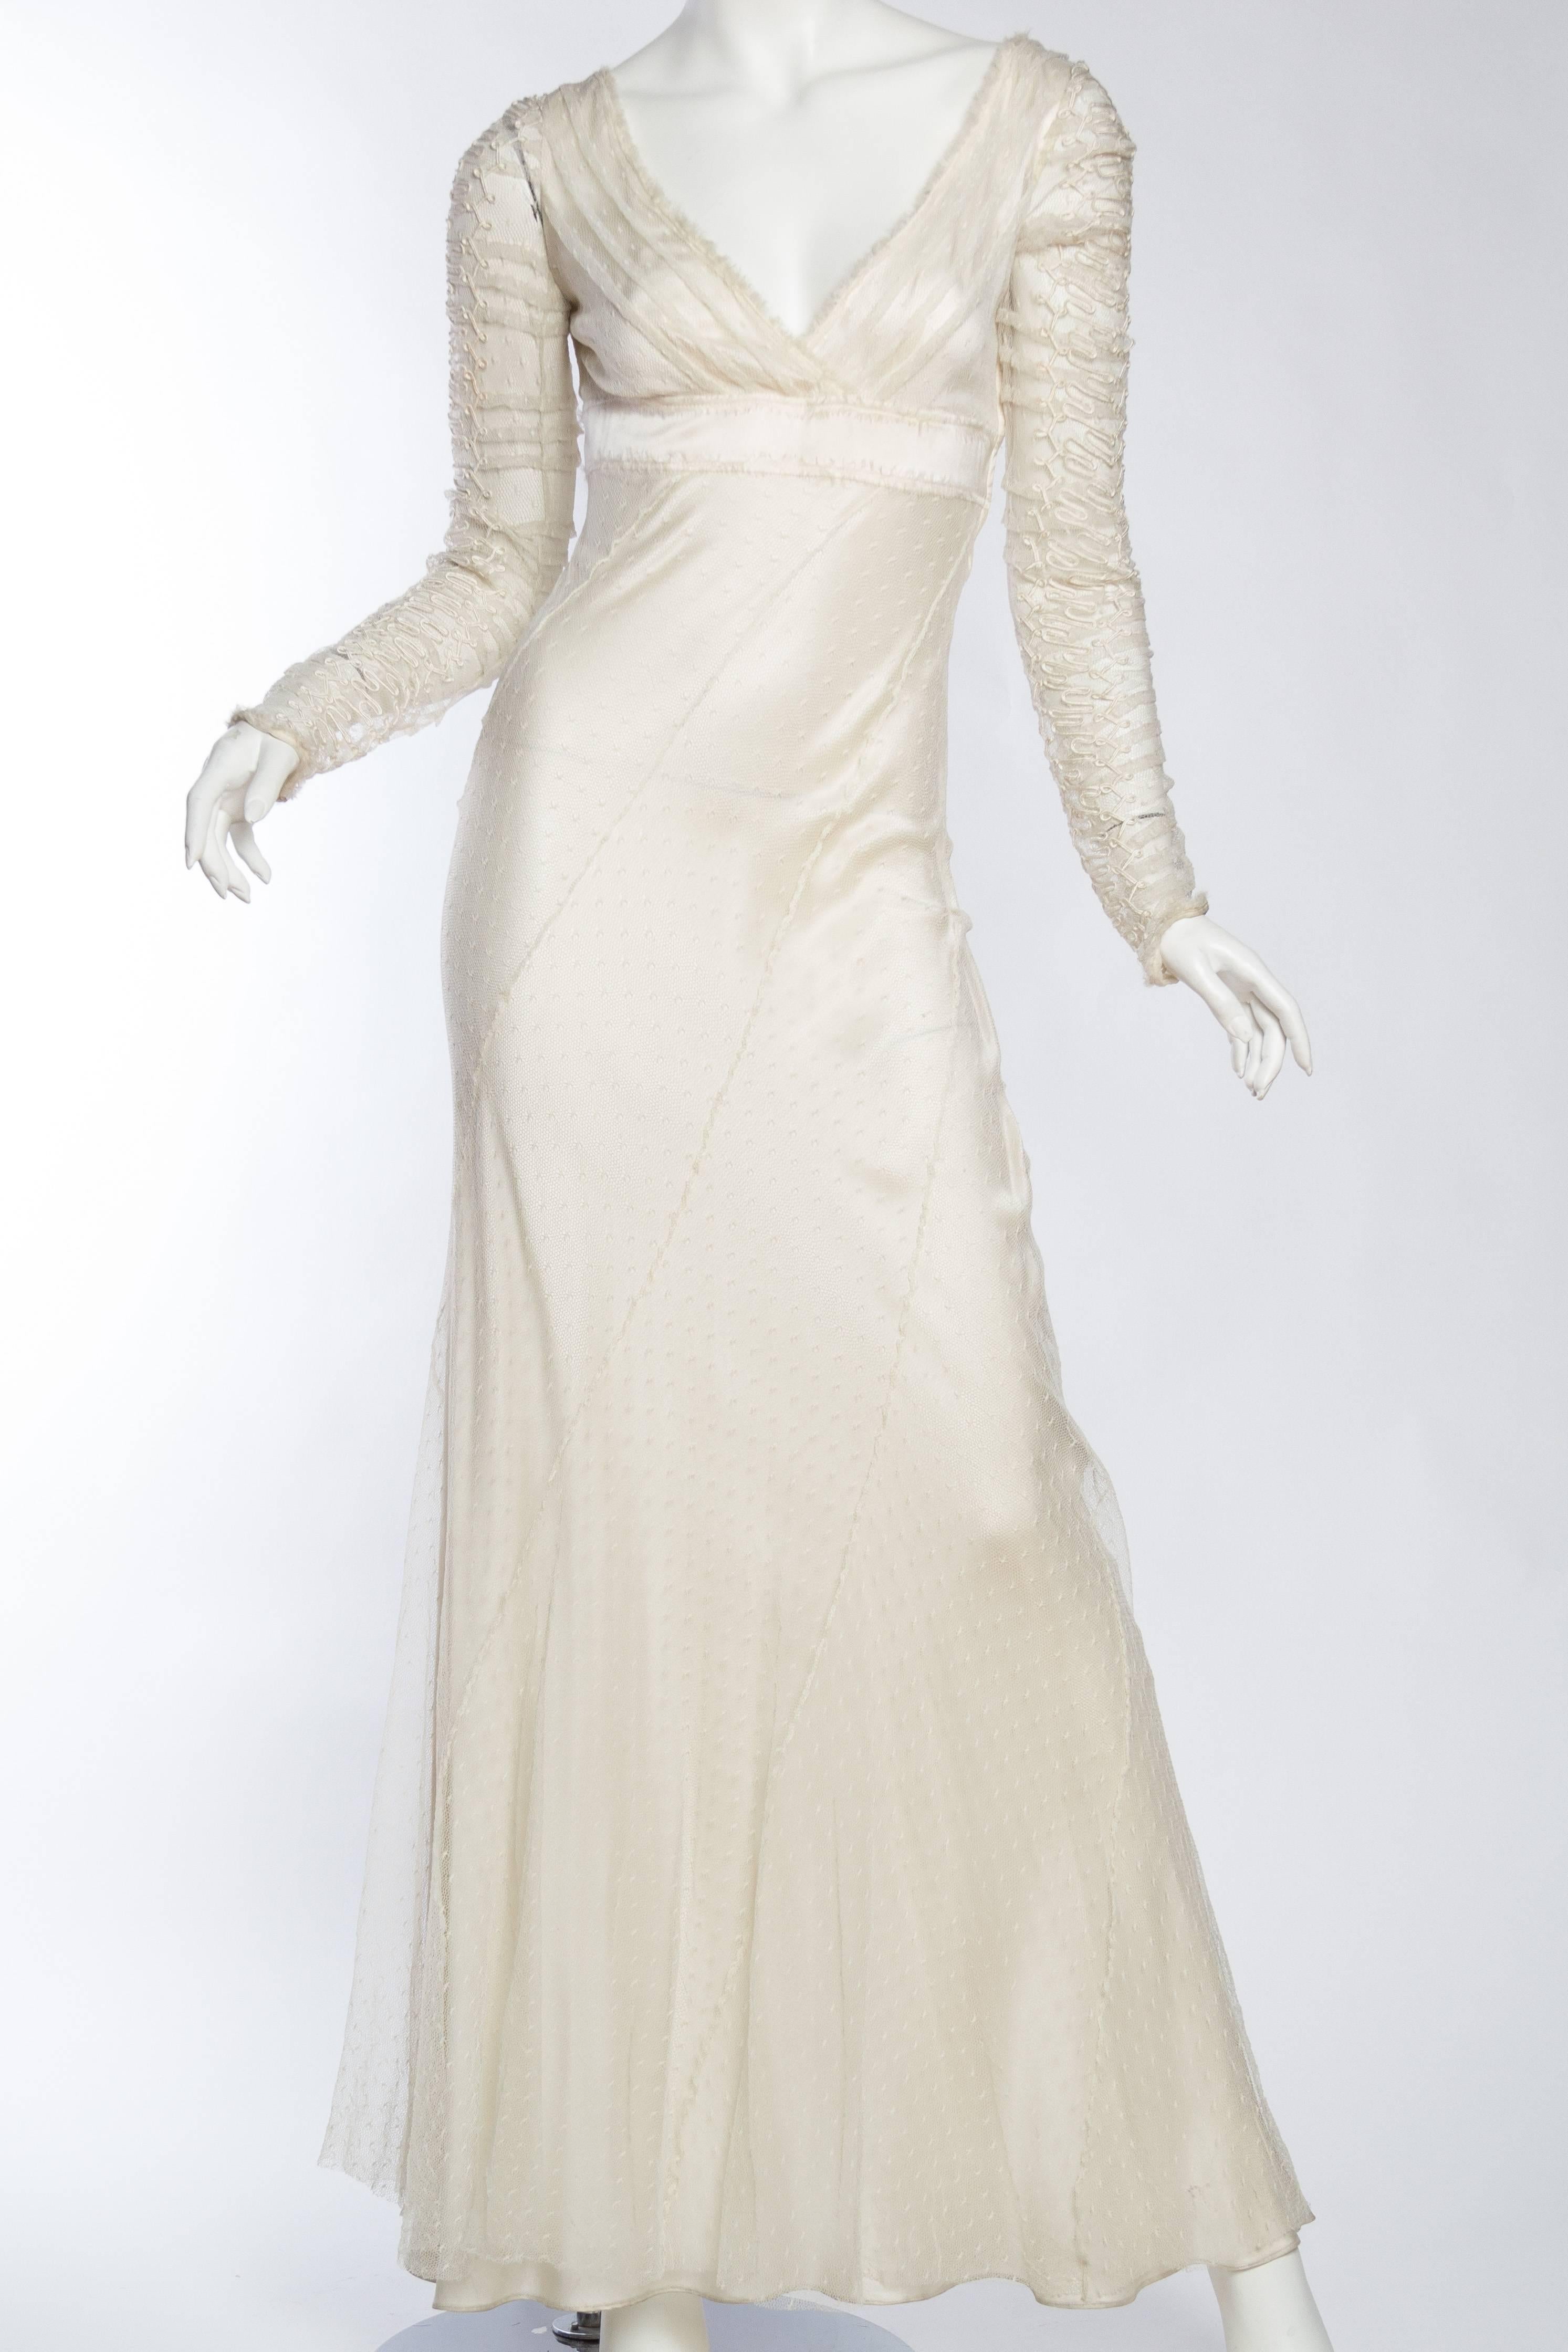 1990S ALBERTA FERRETTI Cream Bias Cut Silk Charmeuse & Tulle Lace Empire Waist Bridal Gown With Embroidered Sleeves